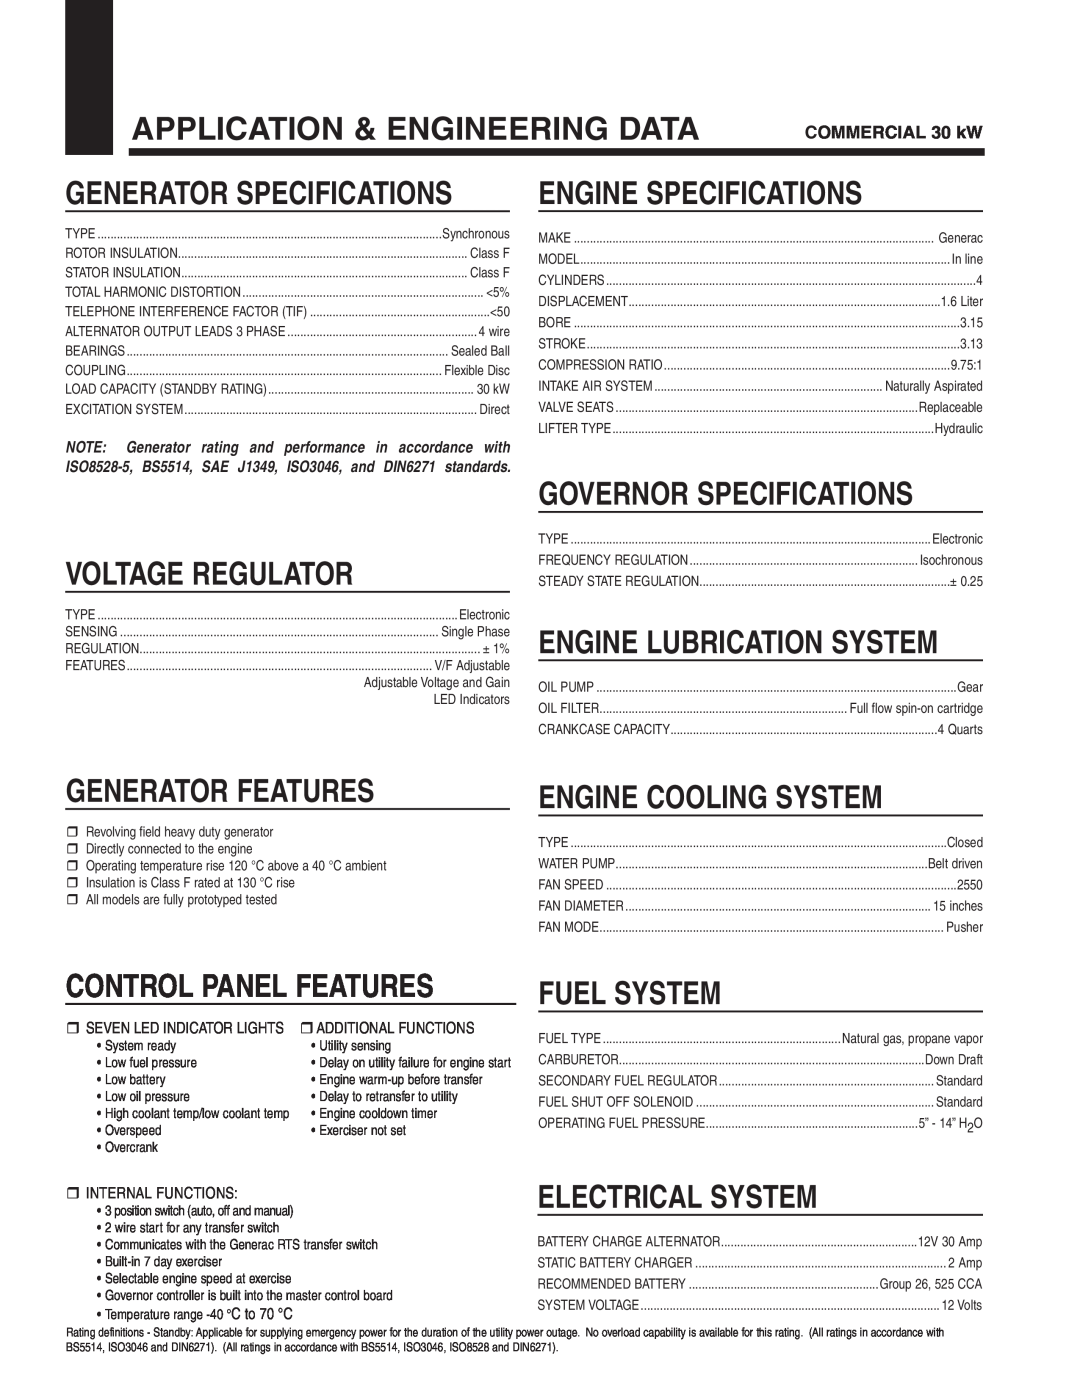 Generac Power Systems QT036 Application & Engineering Data, Engine Specifications, Voltage Regulator, Generator Features 